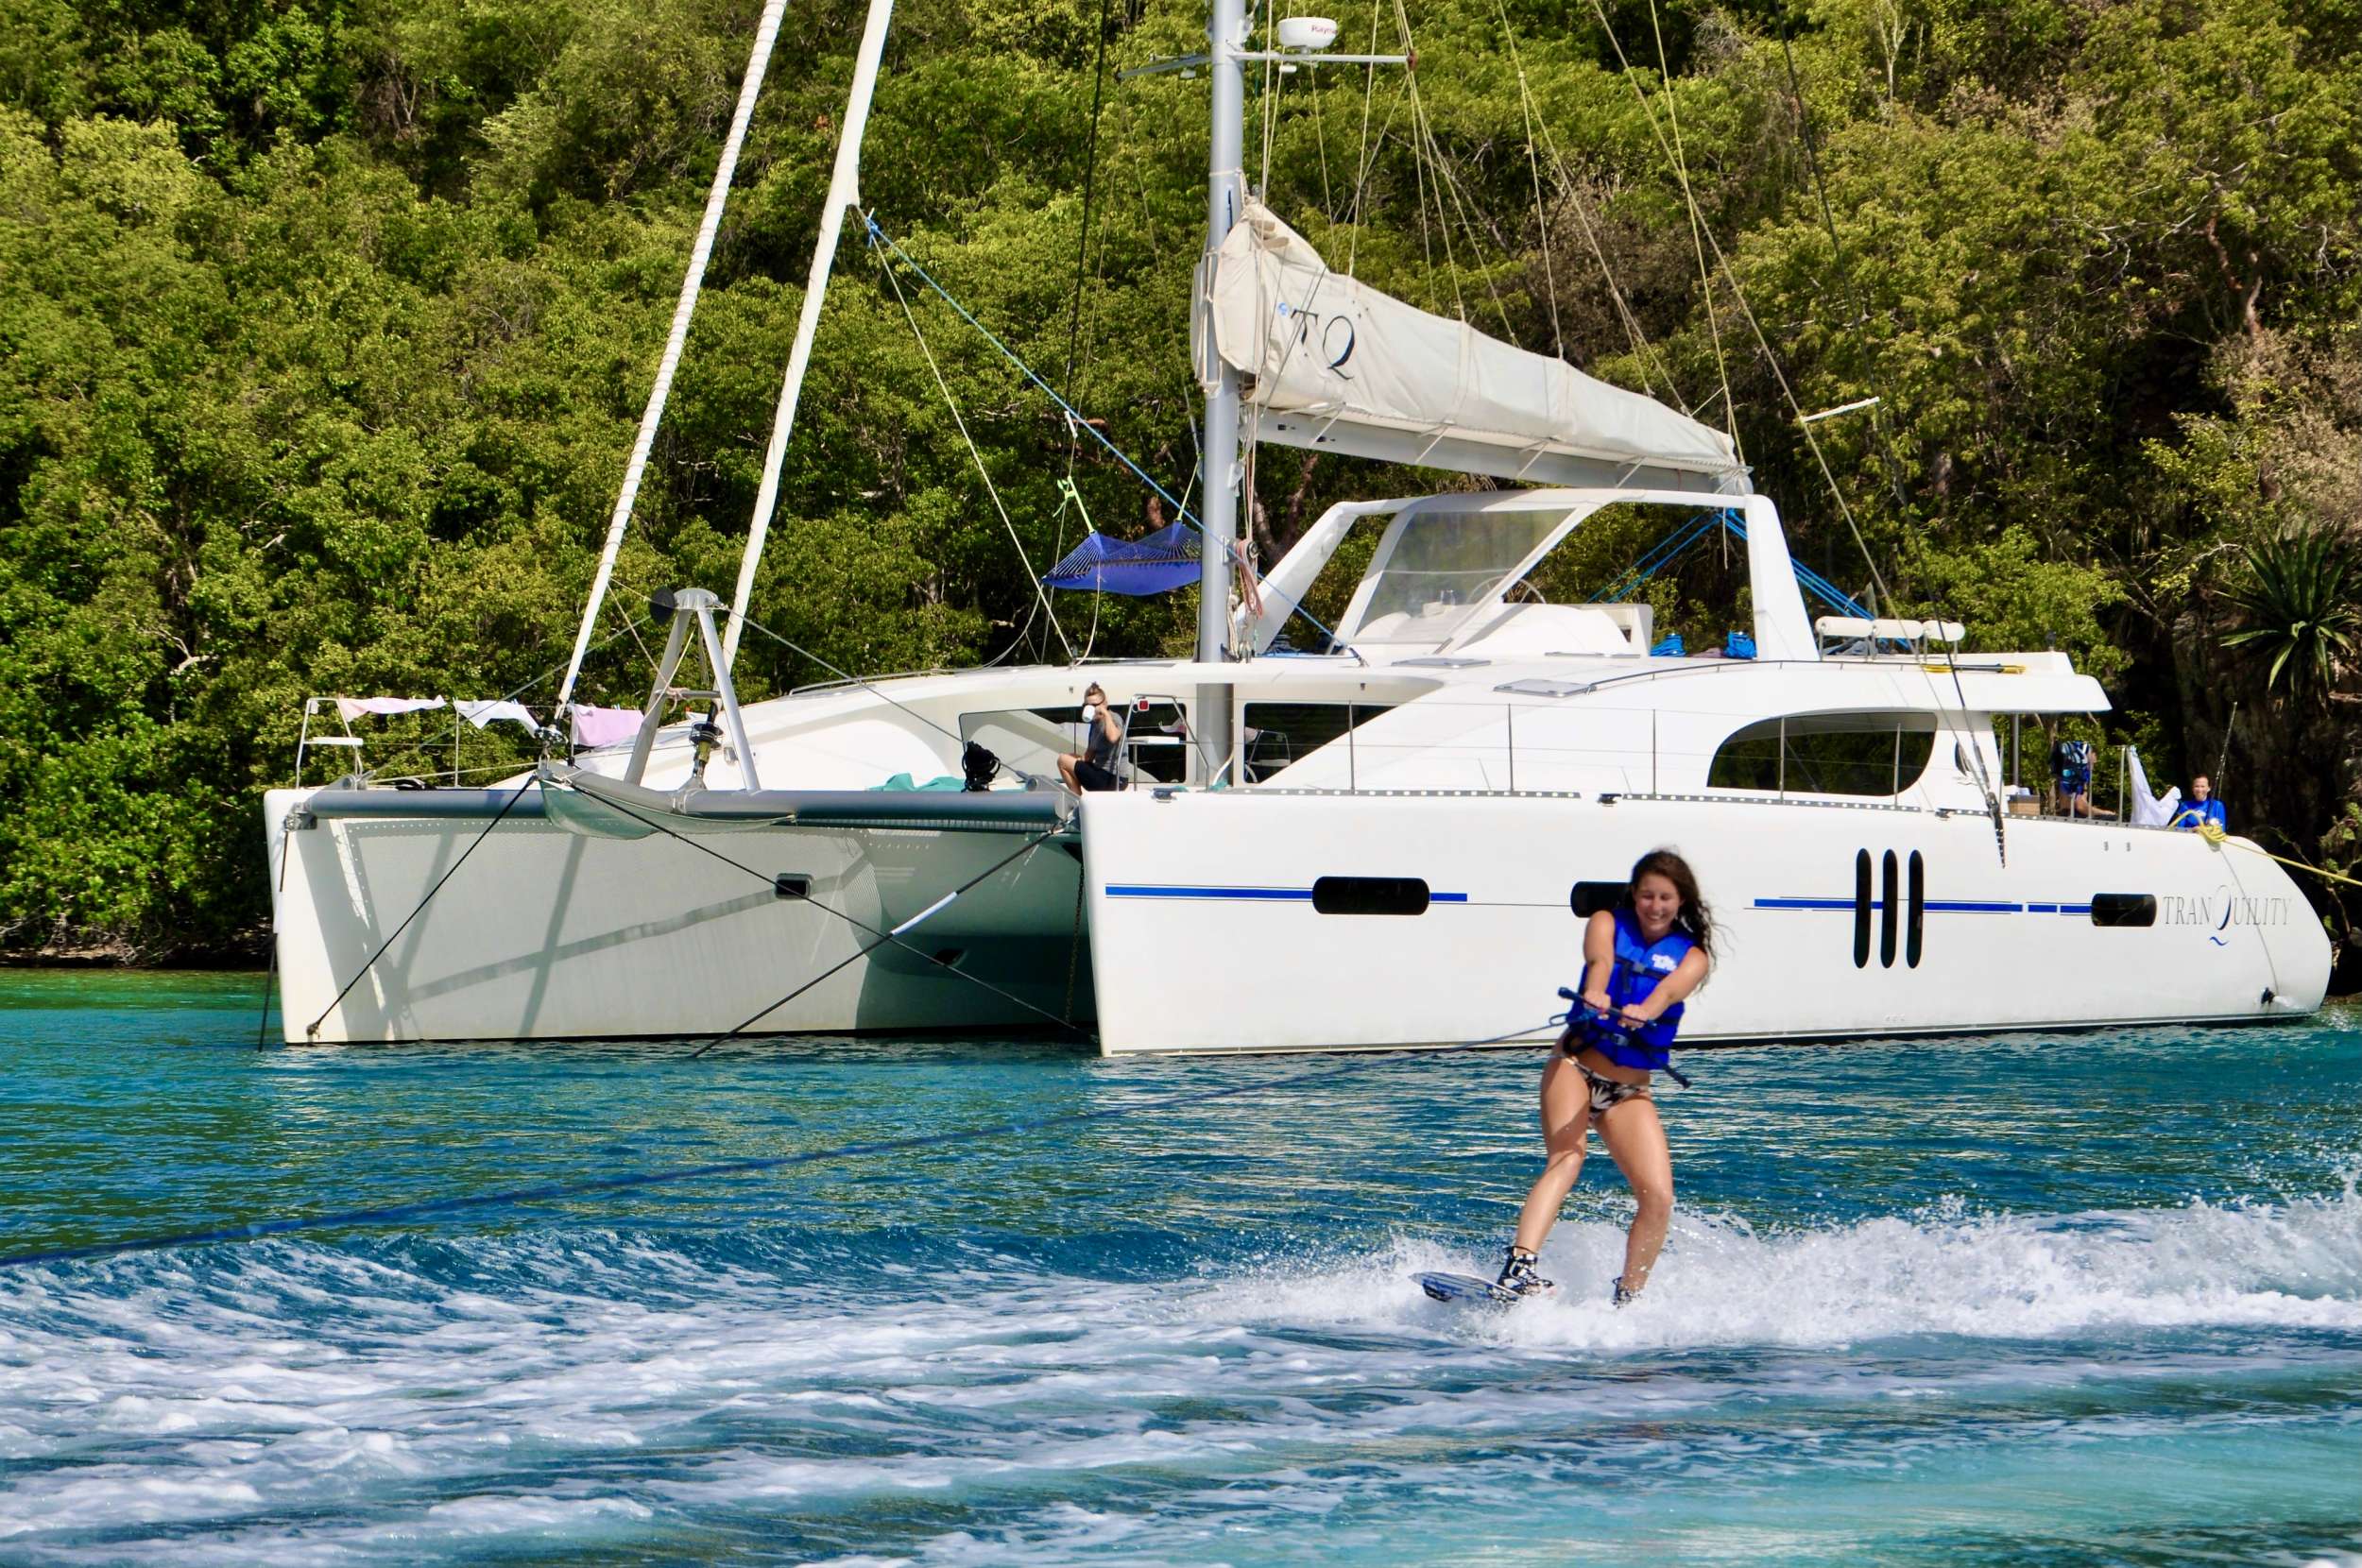 TRANQUILITY Yacht Charter - Wake boarding